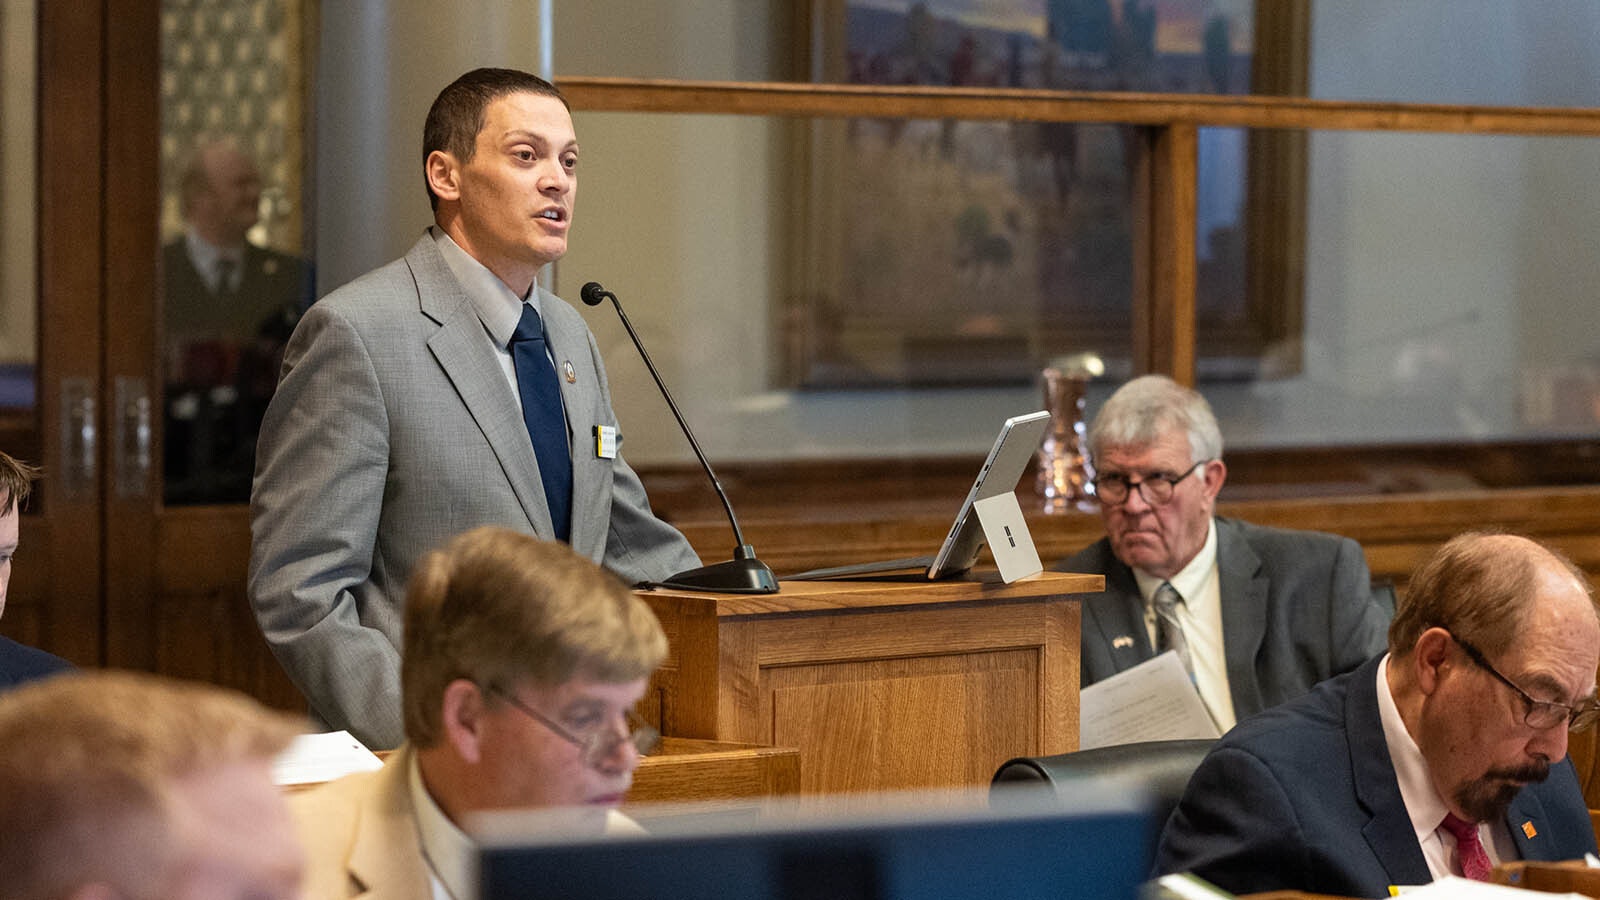 State Rep. Landon Brown, R-Cheyenne, reacted strongly to the Senate's eliminating $118 million for major school construction.